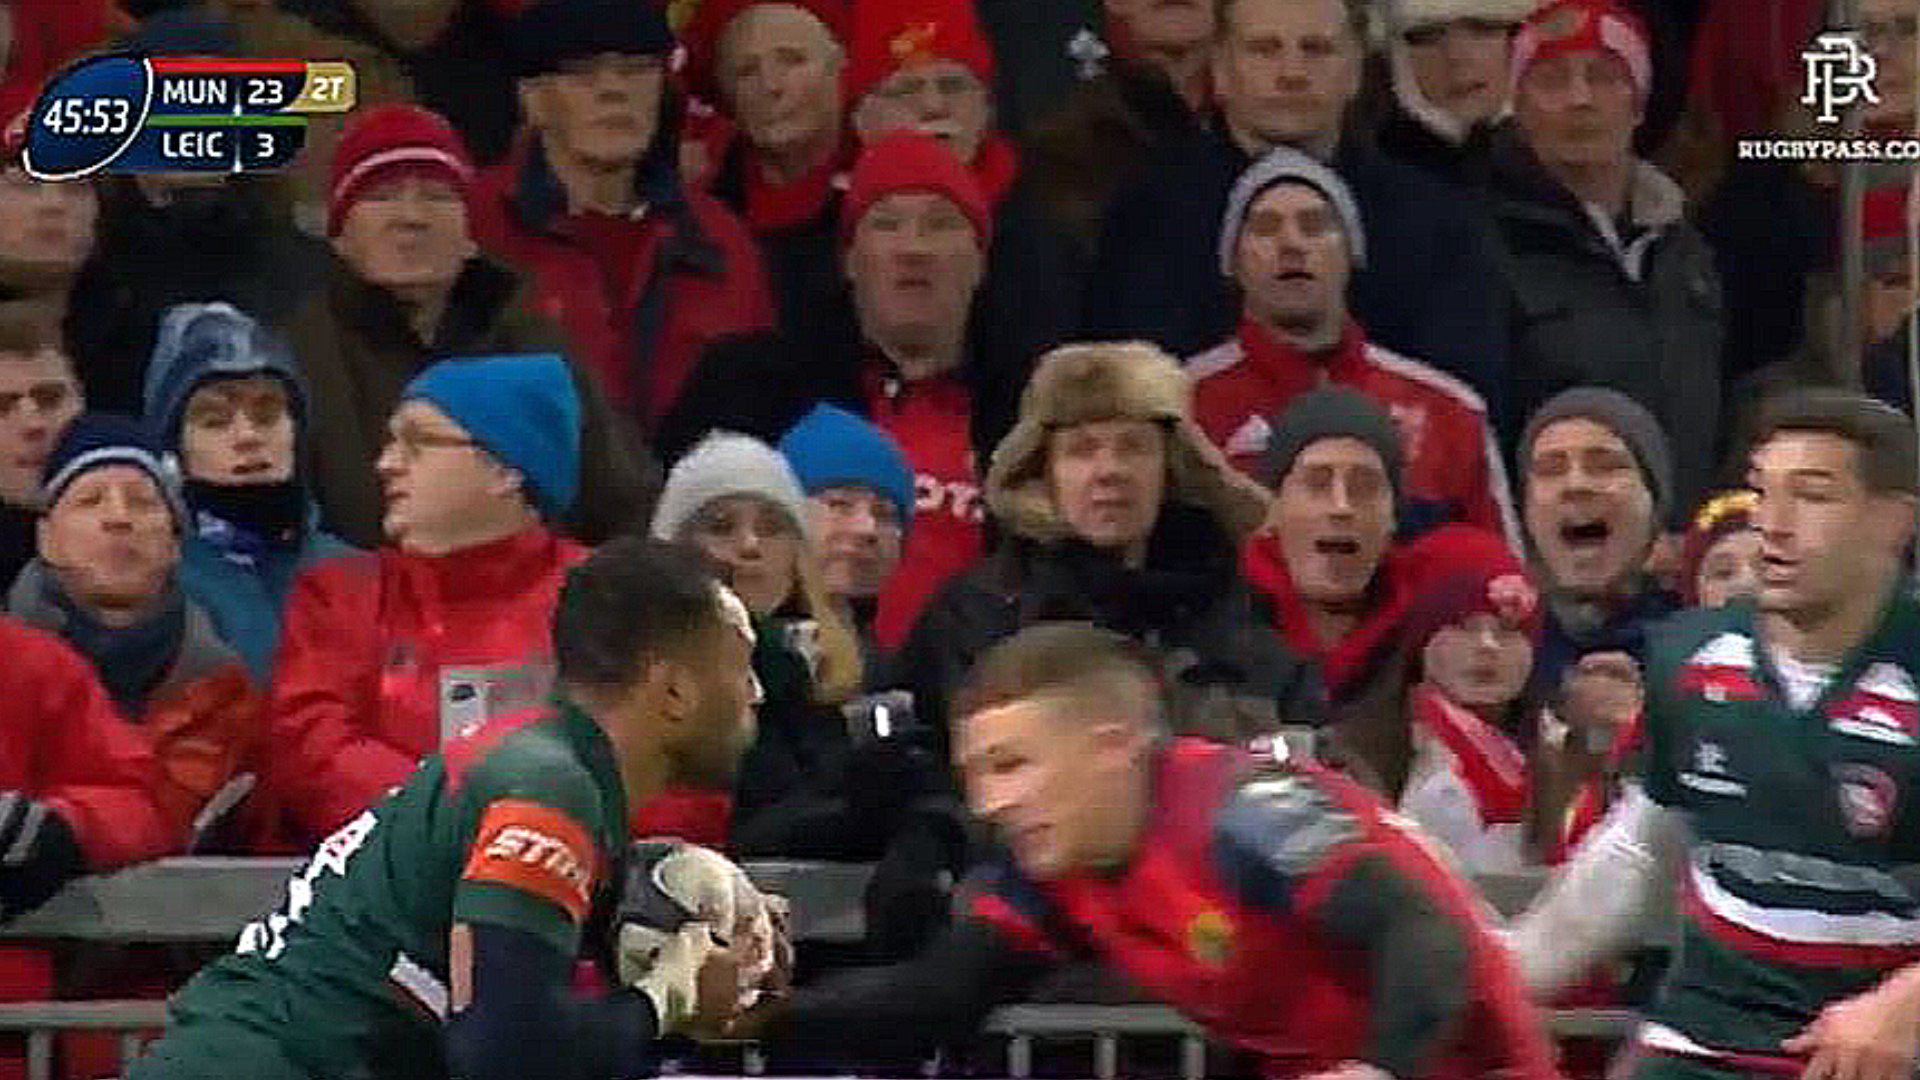 WATCH: Leicester fullback Telusa Veainu breaks his jaw during head on collision against Munster